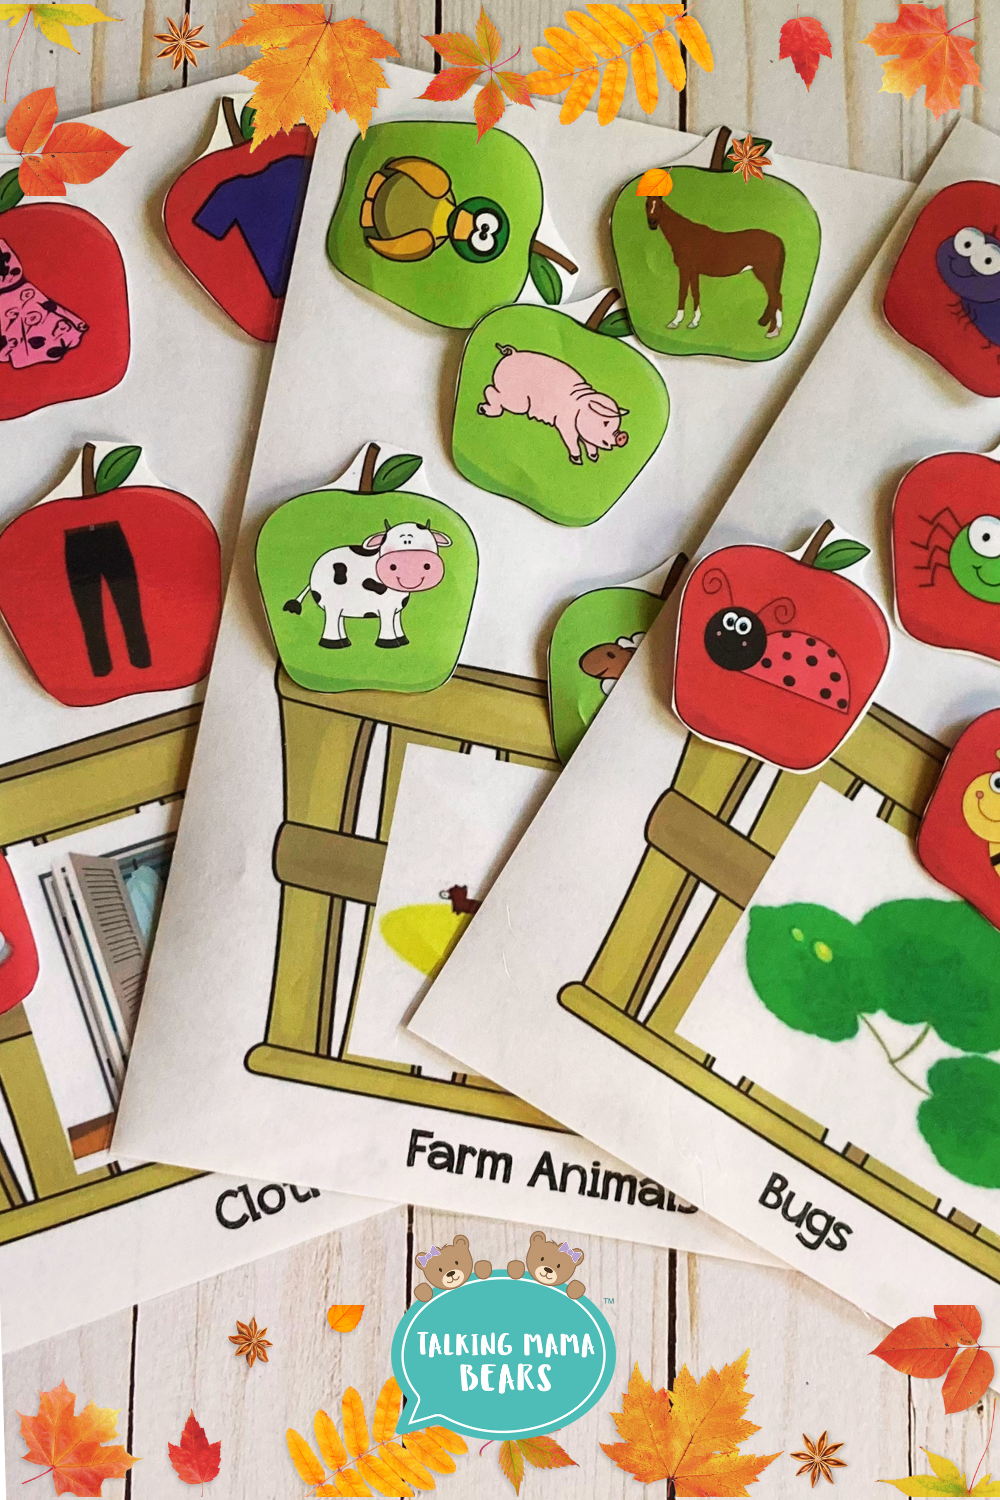 apple category sorts to help with animal identification